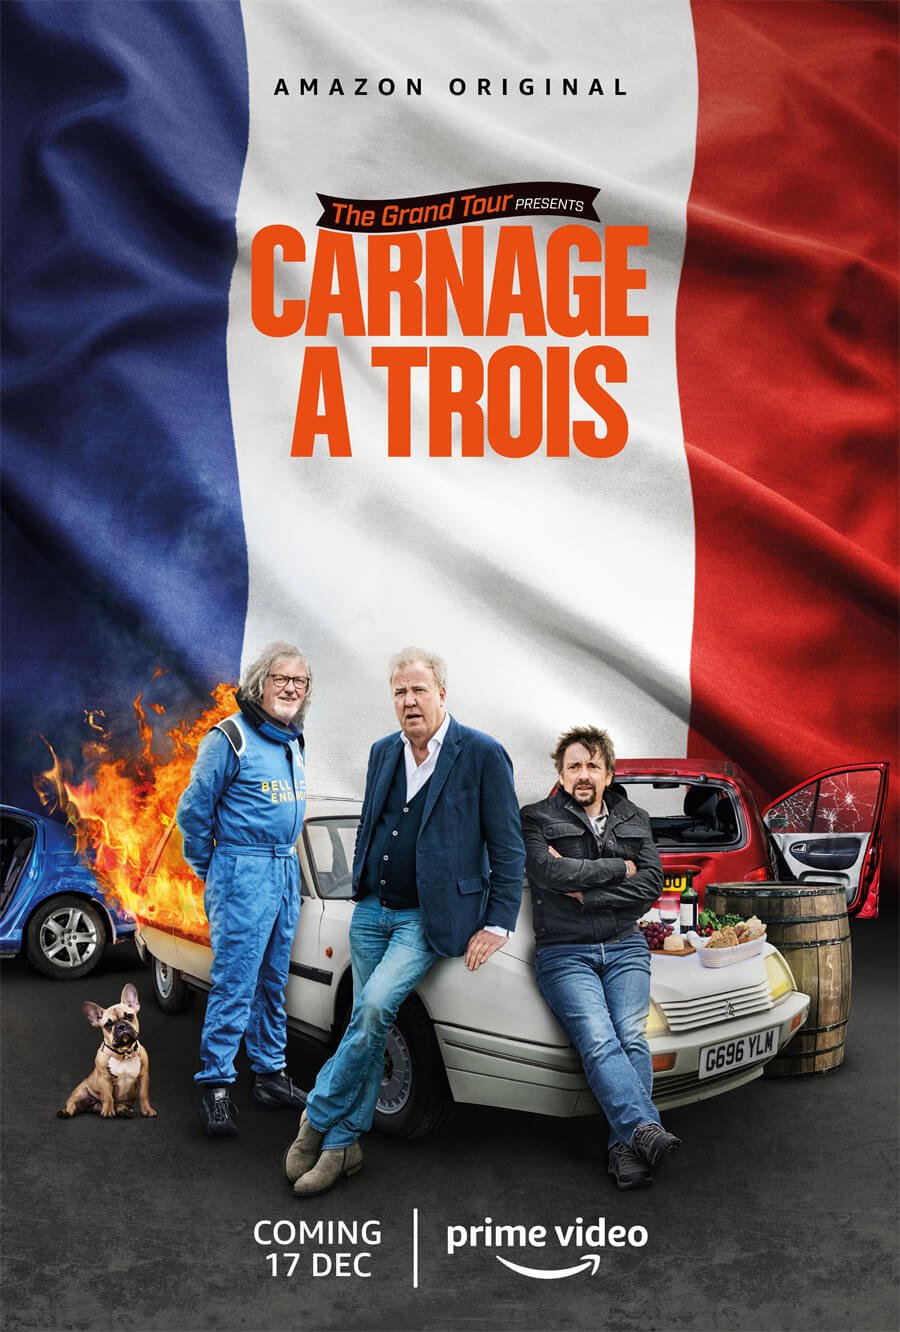 The Grand Tour Presents-Carnage A Trois (1).jpg